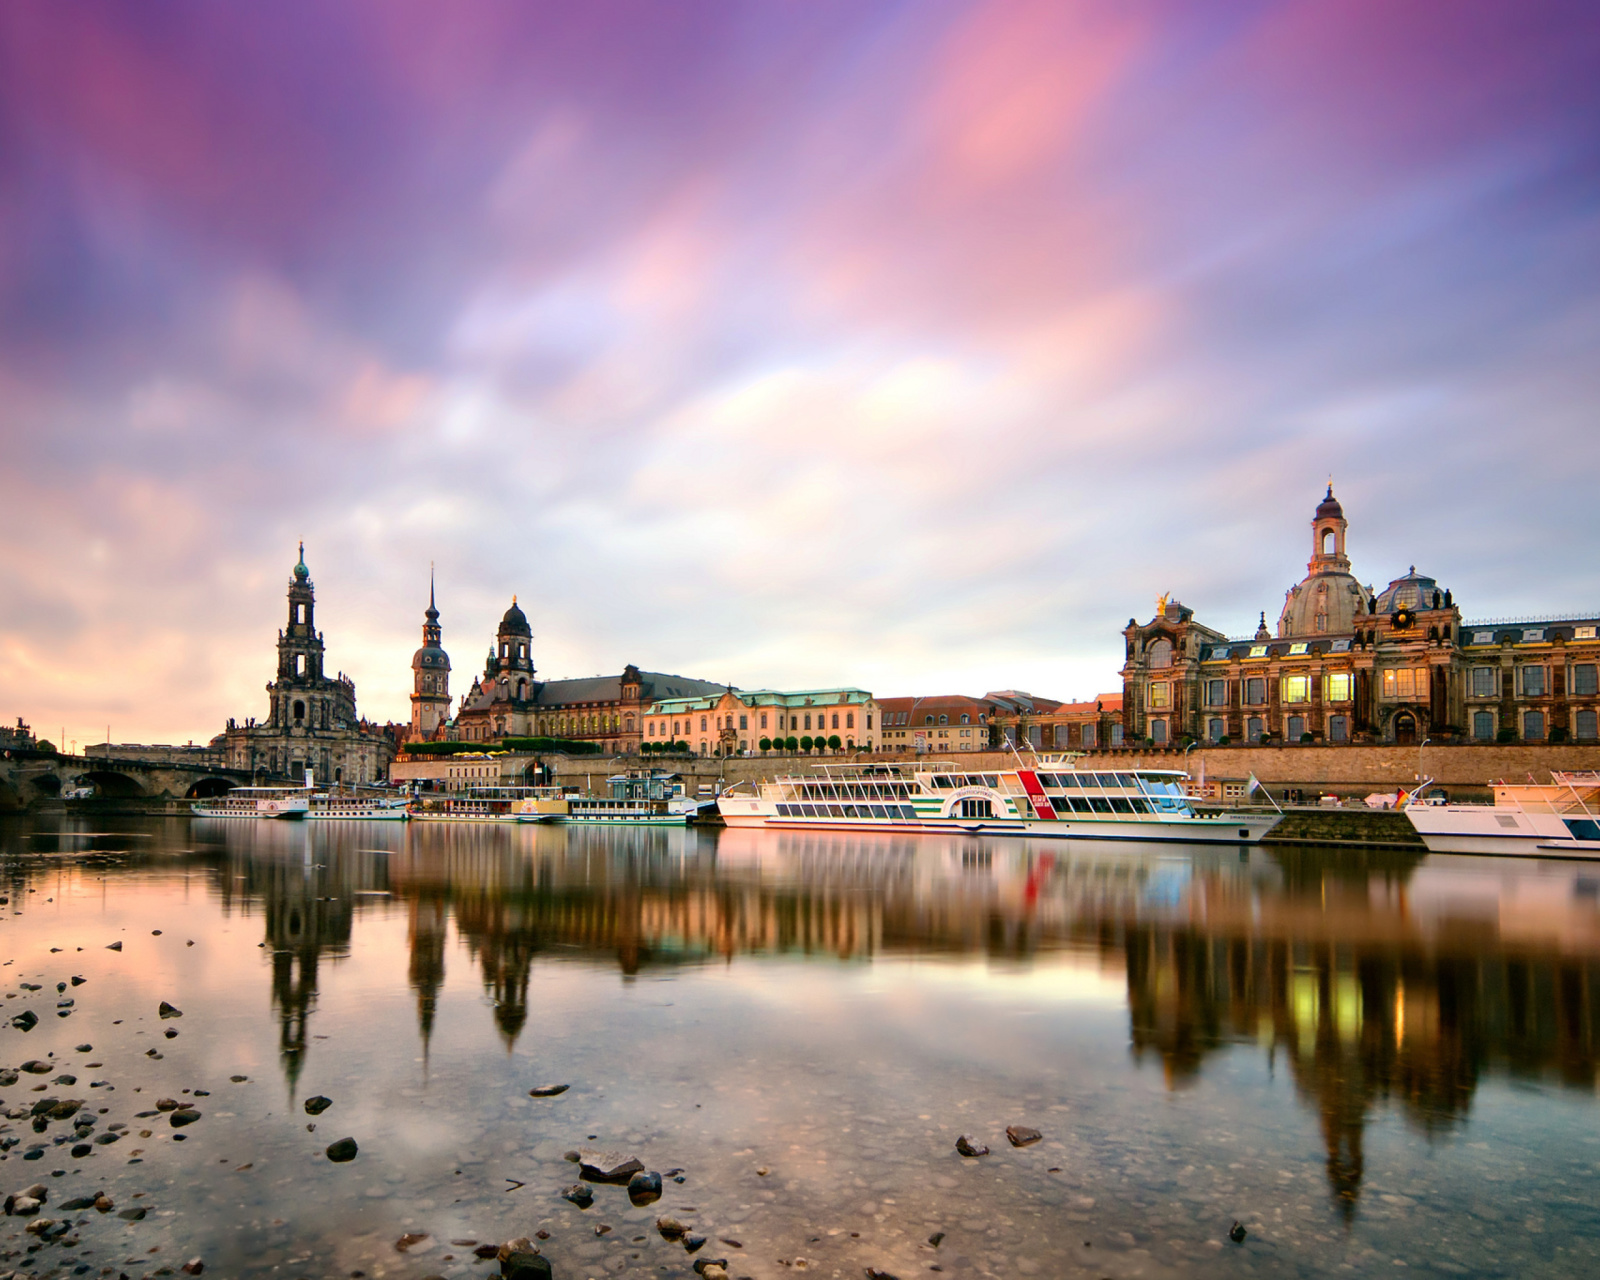 Dresden on Elbe River near Zwinger Palace wallpaper 1600x1280